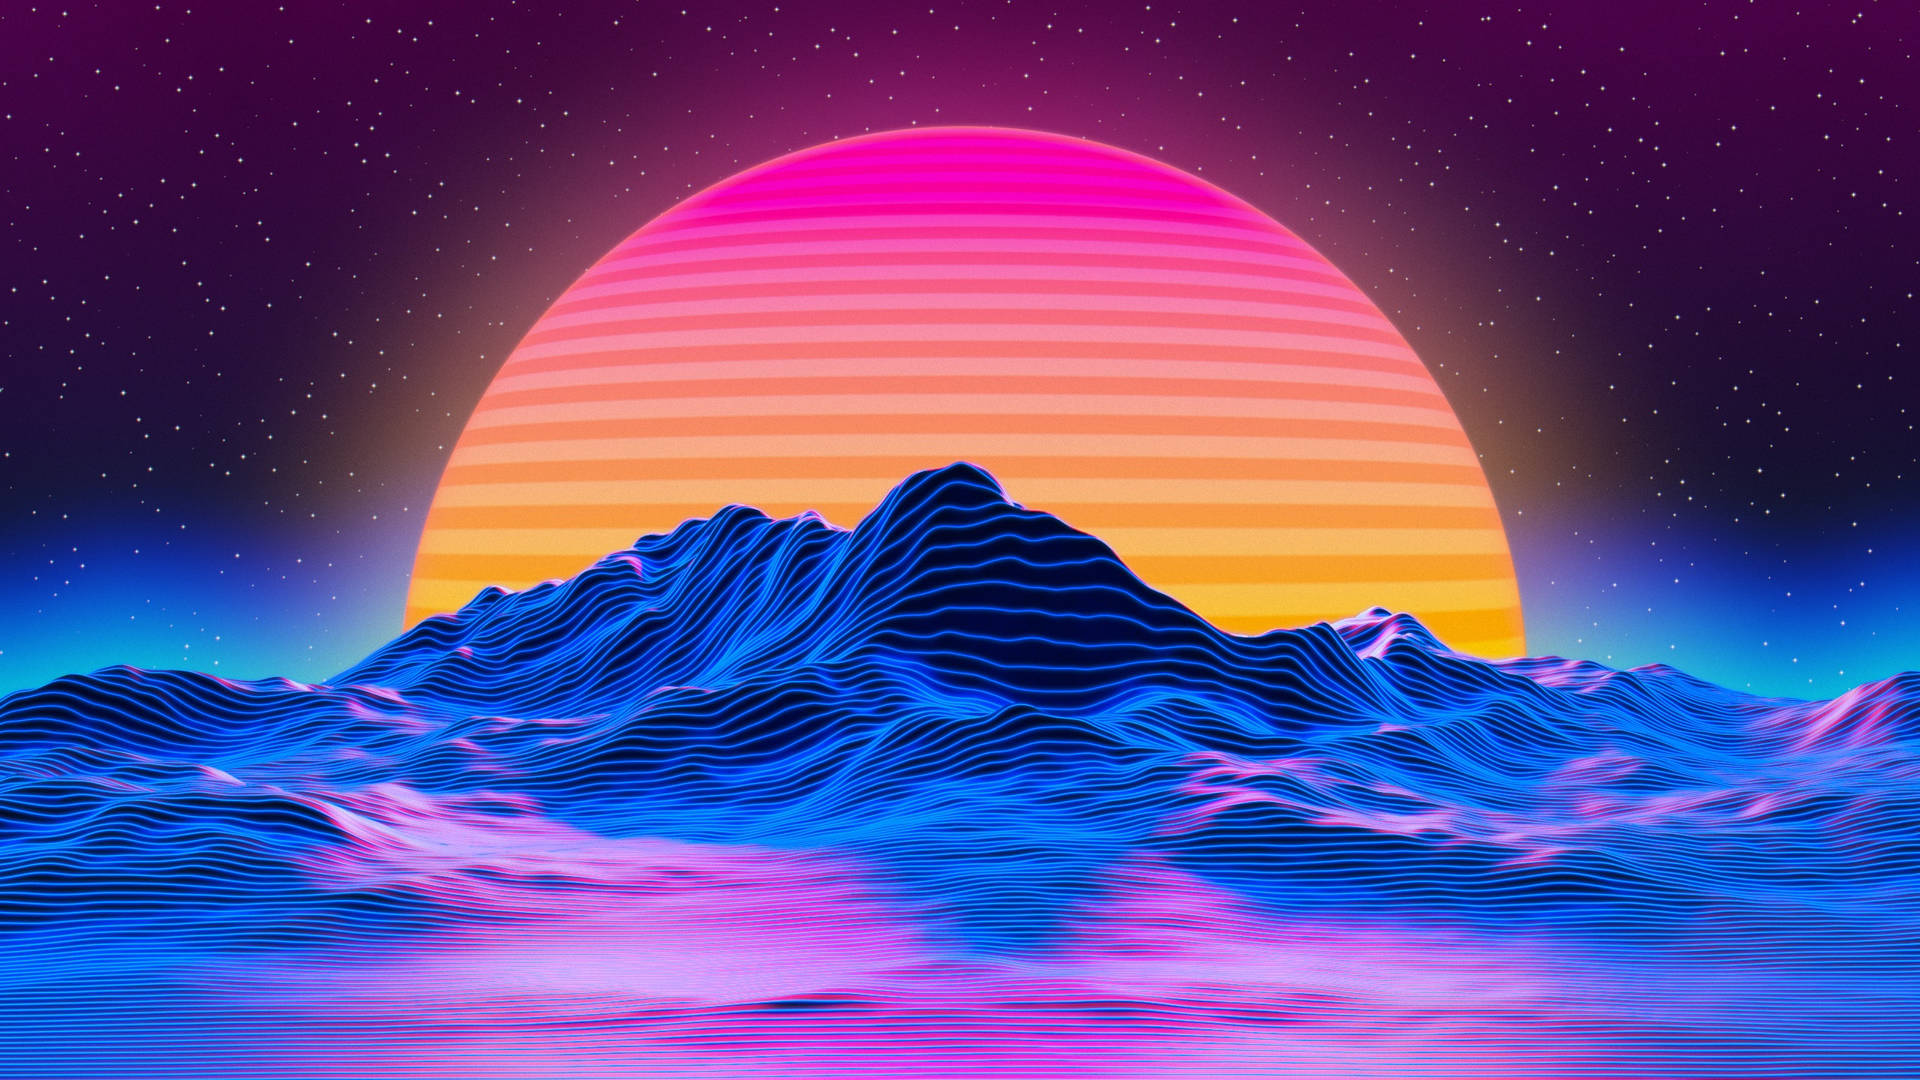 A Colorful Sunrise Over A Mountain Background